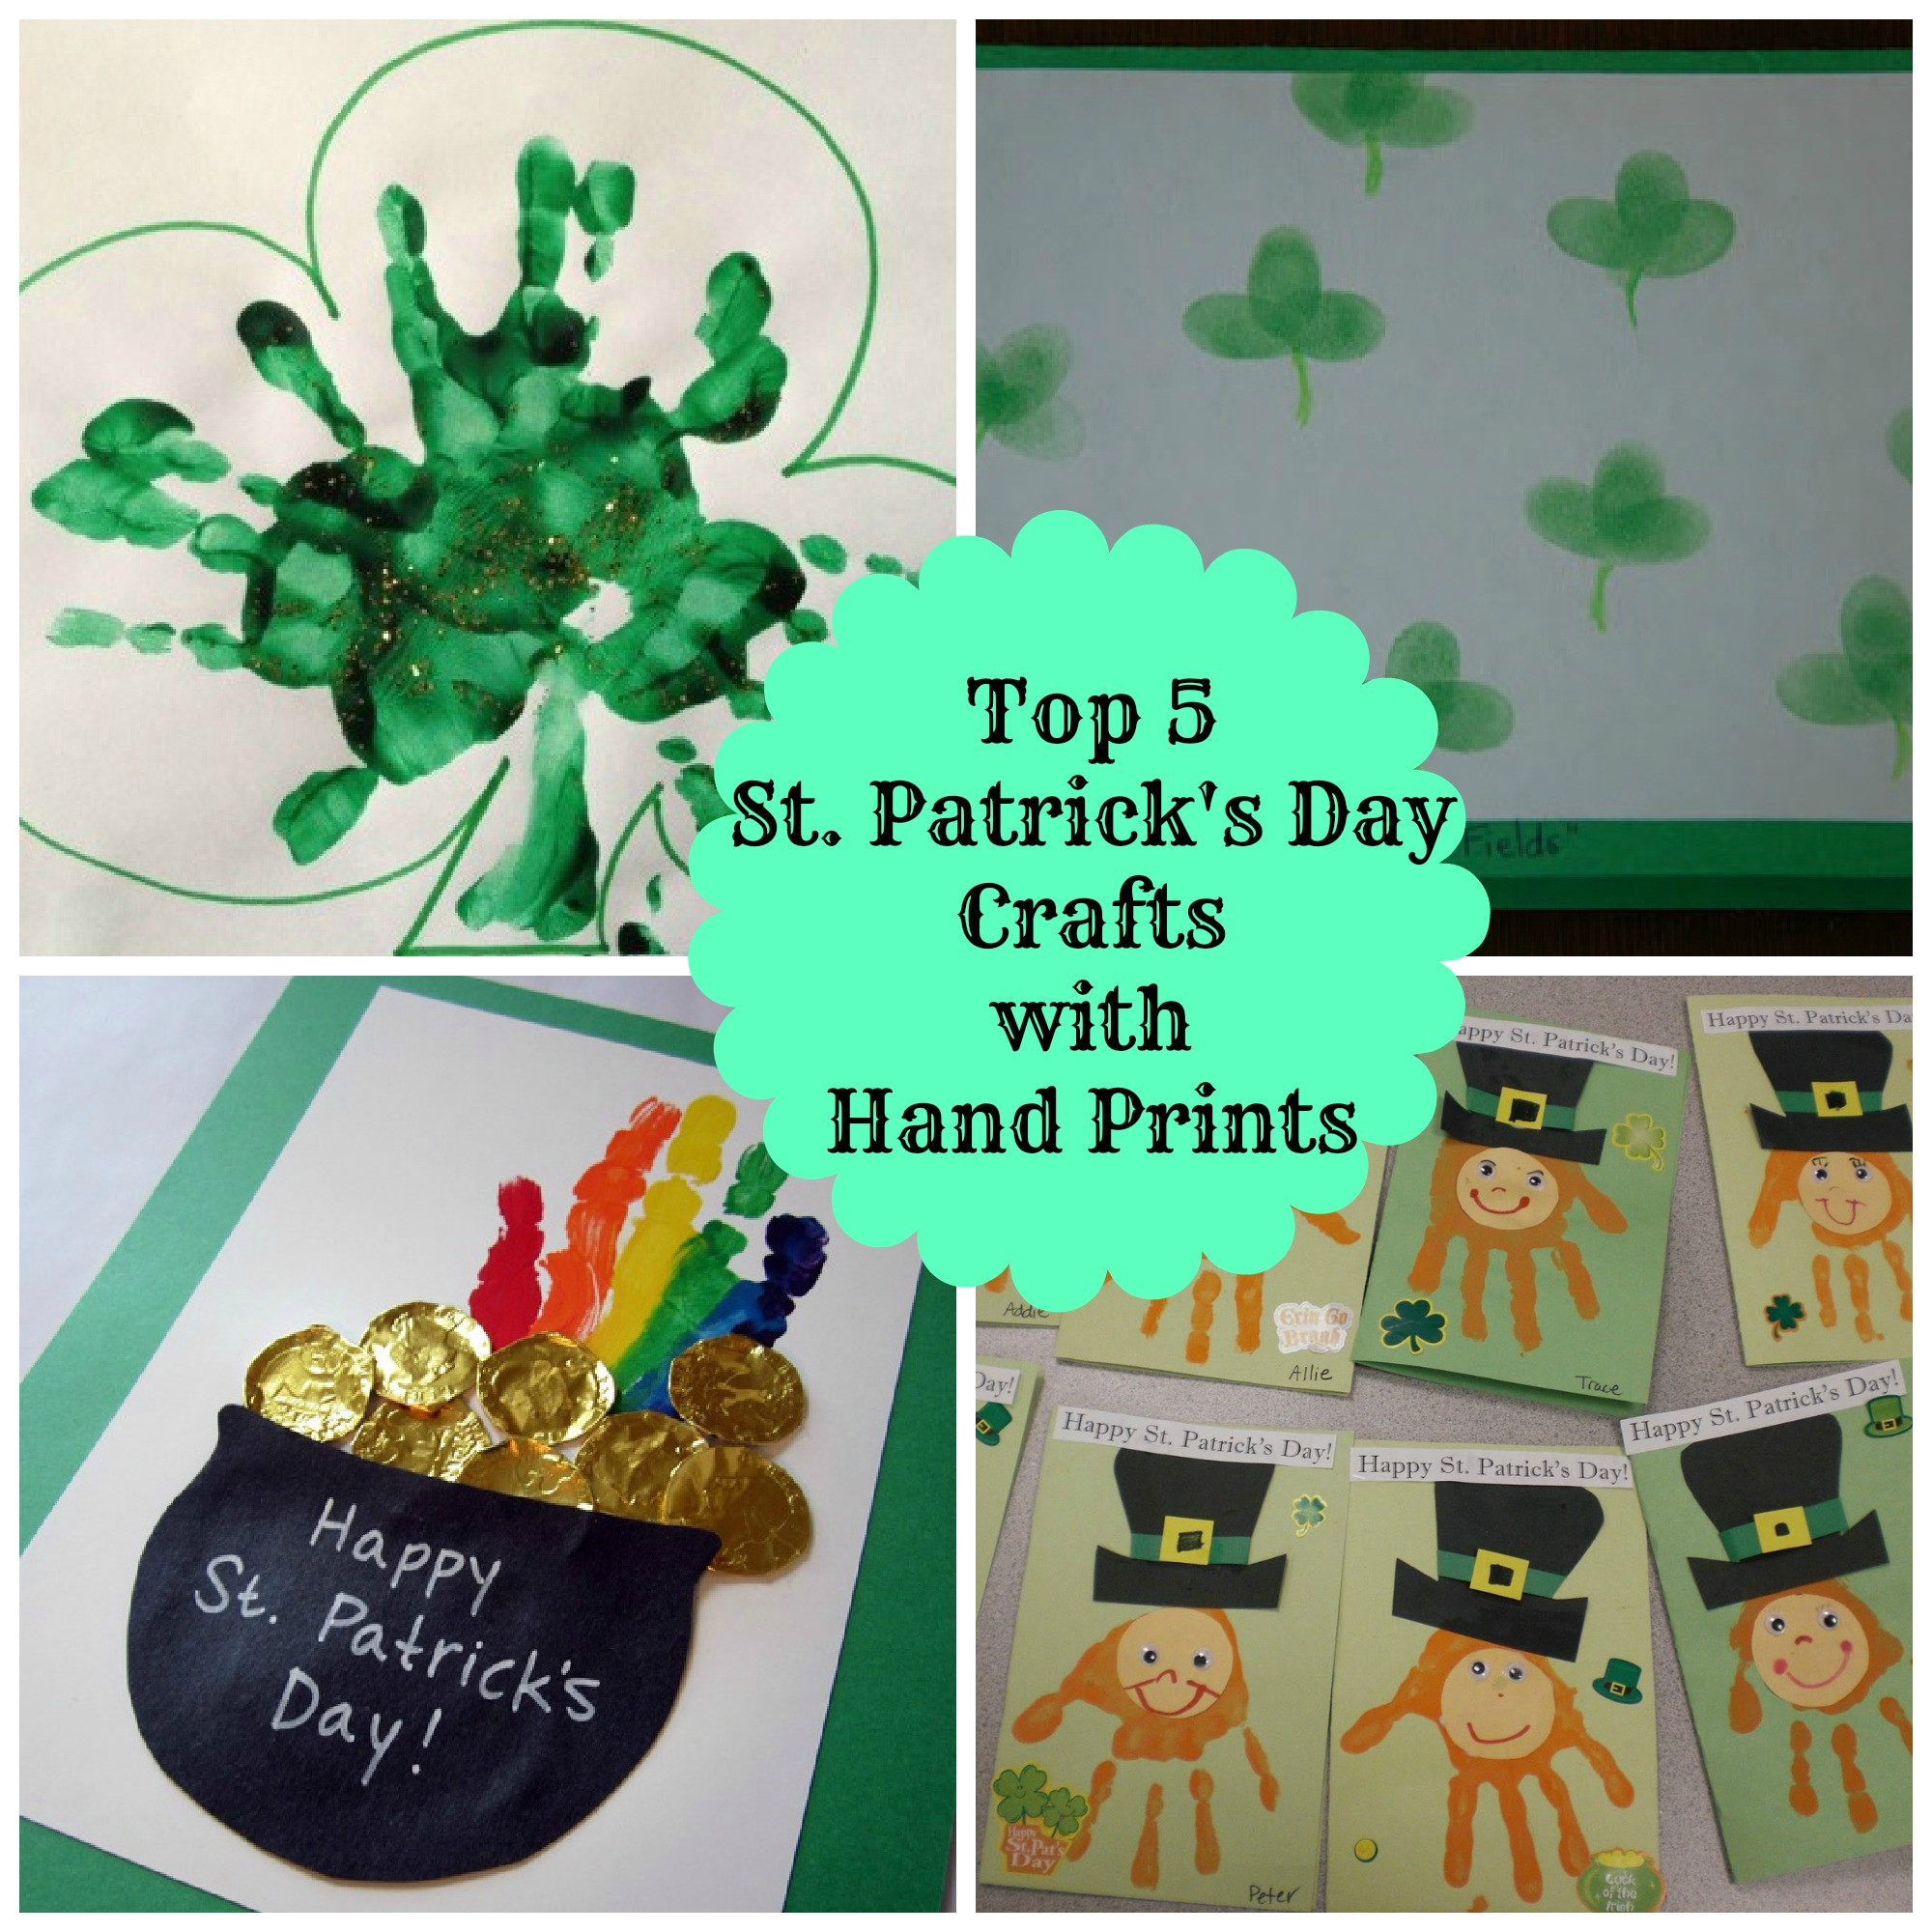 St Patrick's Day Crafts For Preschoolers Easy
 5 Easy Hand Print St Patrick s Day Crafts for Kids